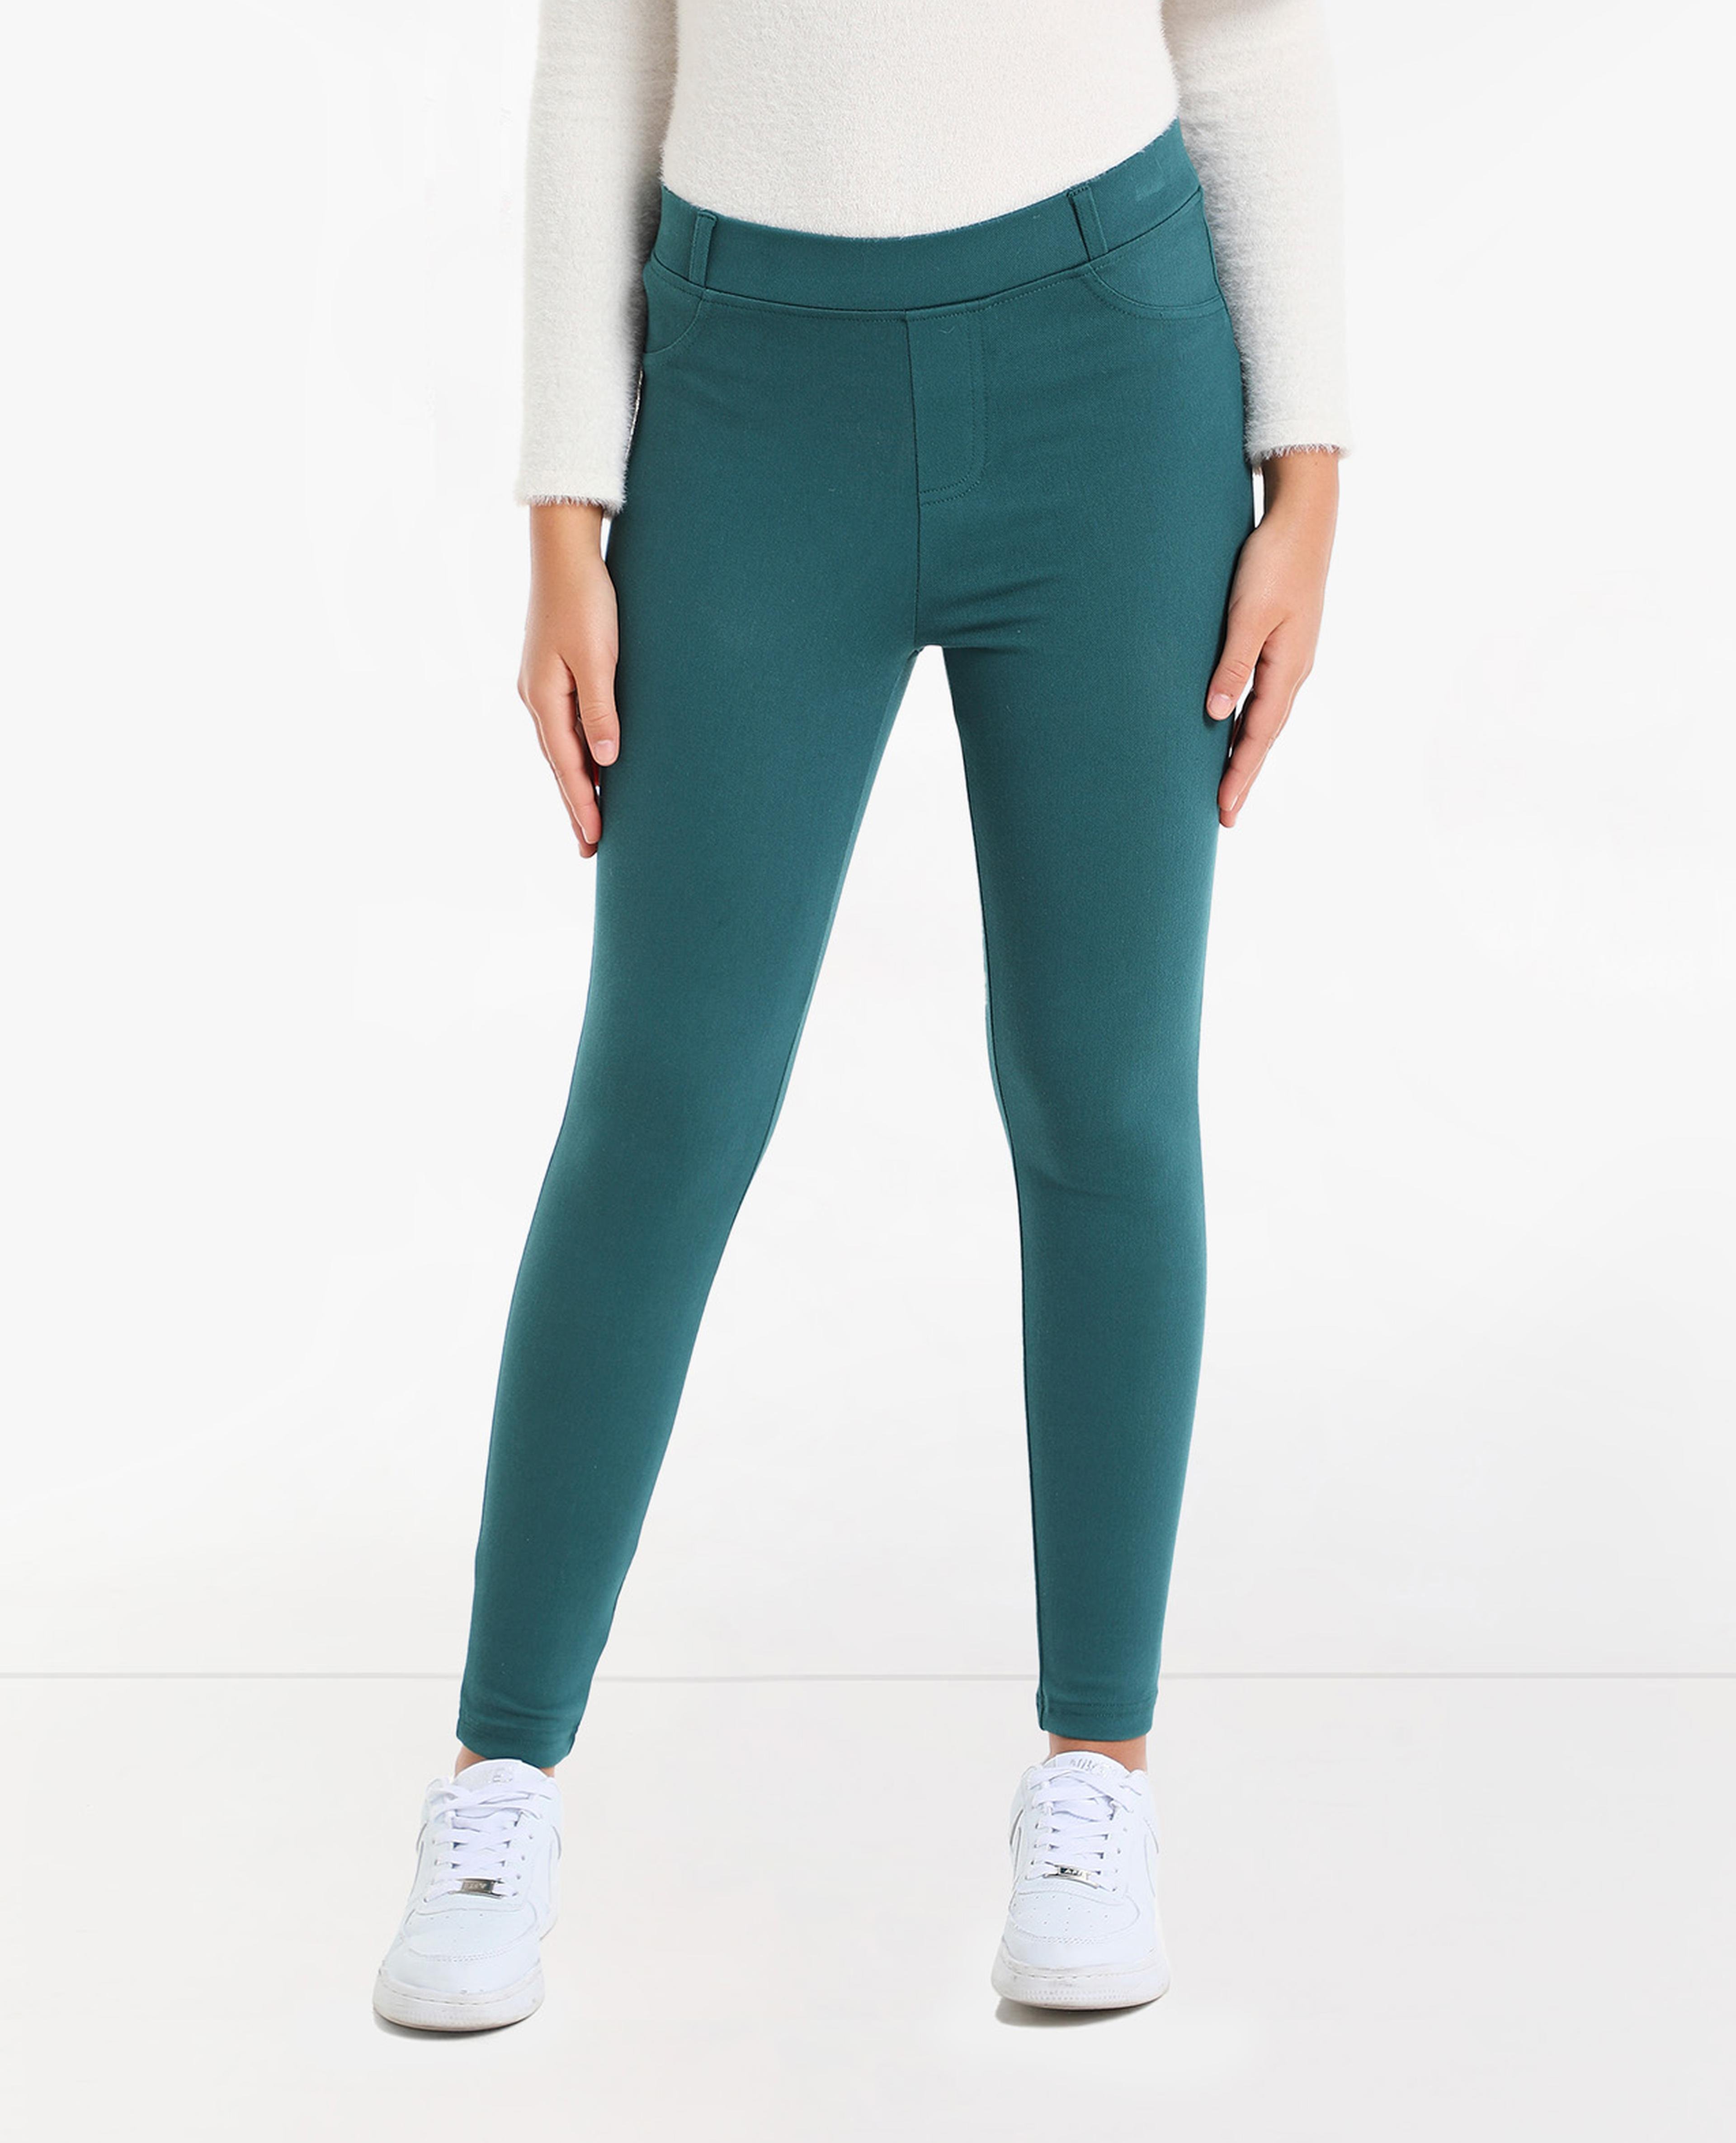 Solid Stretch Pants with Elasticated Waistband